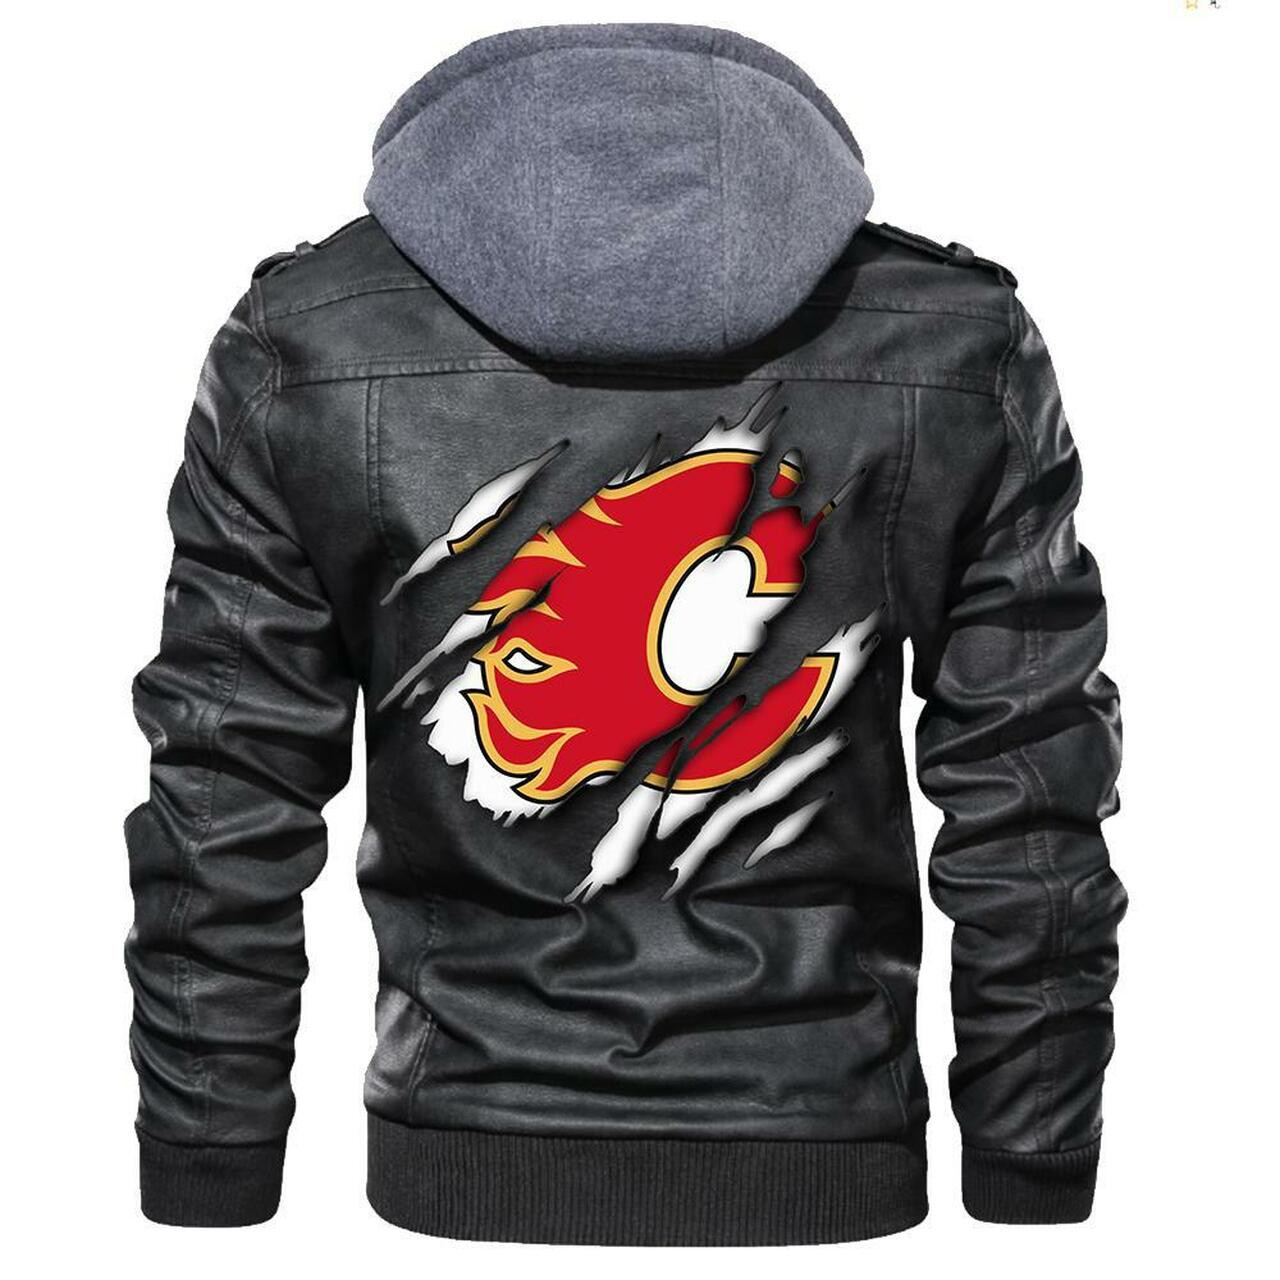 Don't wait another minute, Get Hot Leather Jacket today 154